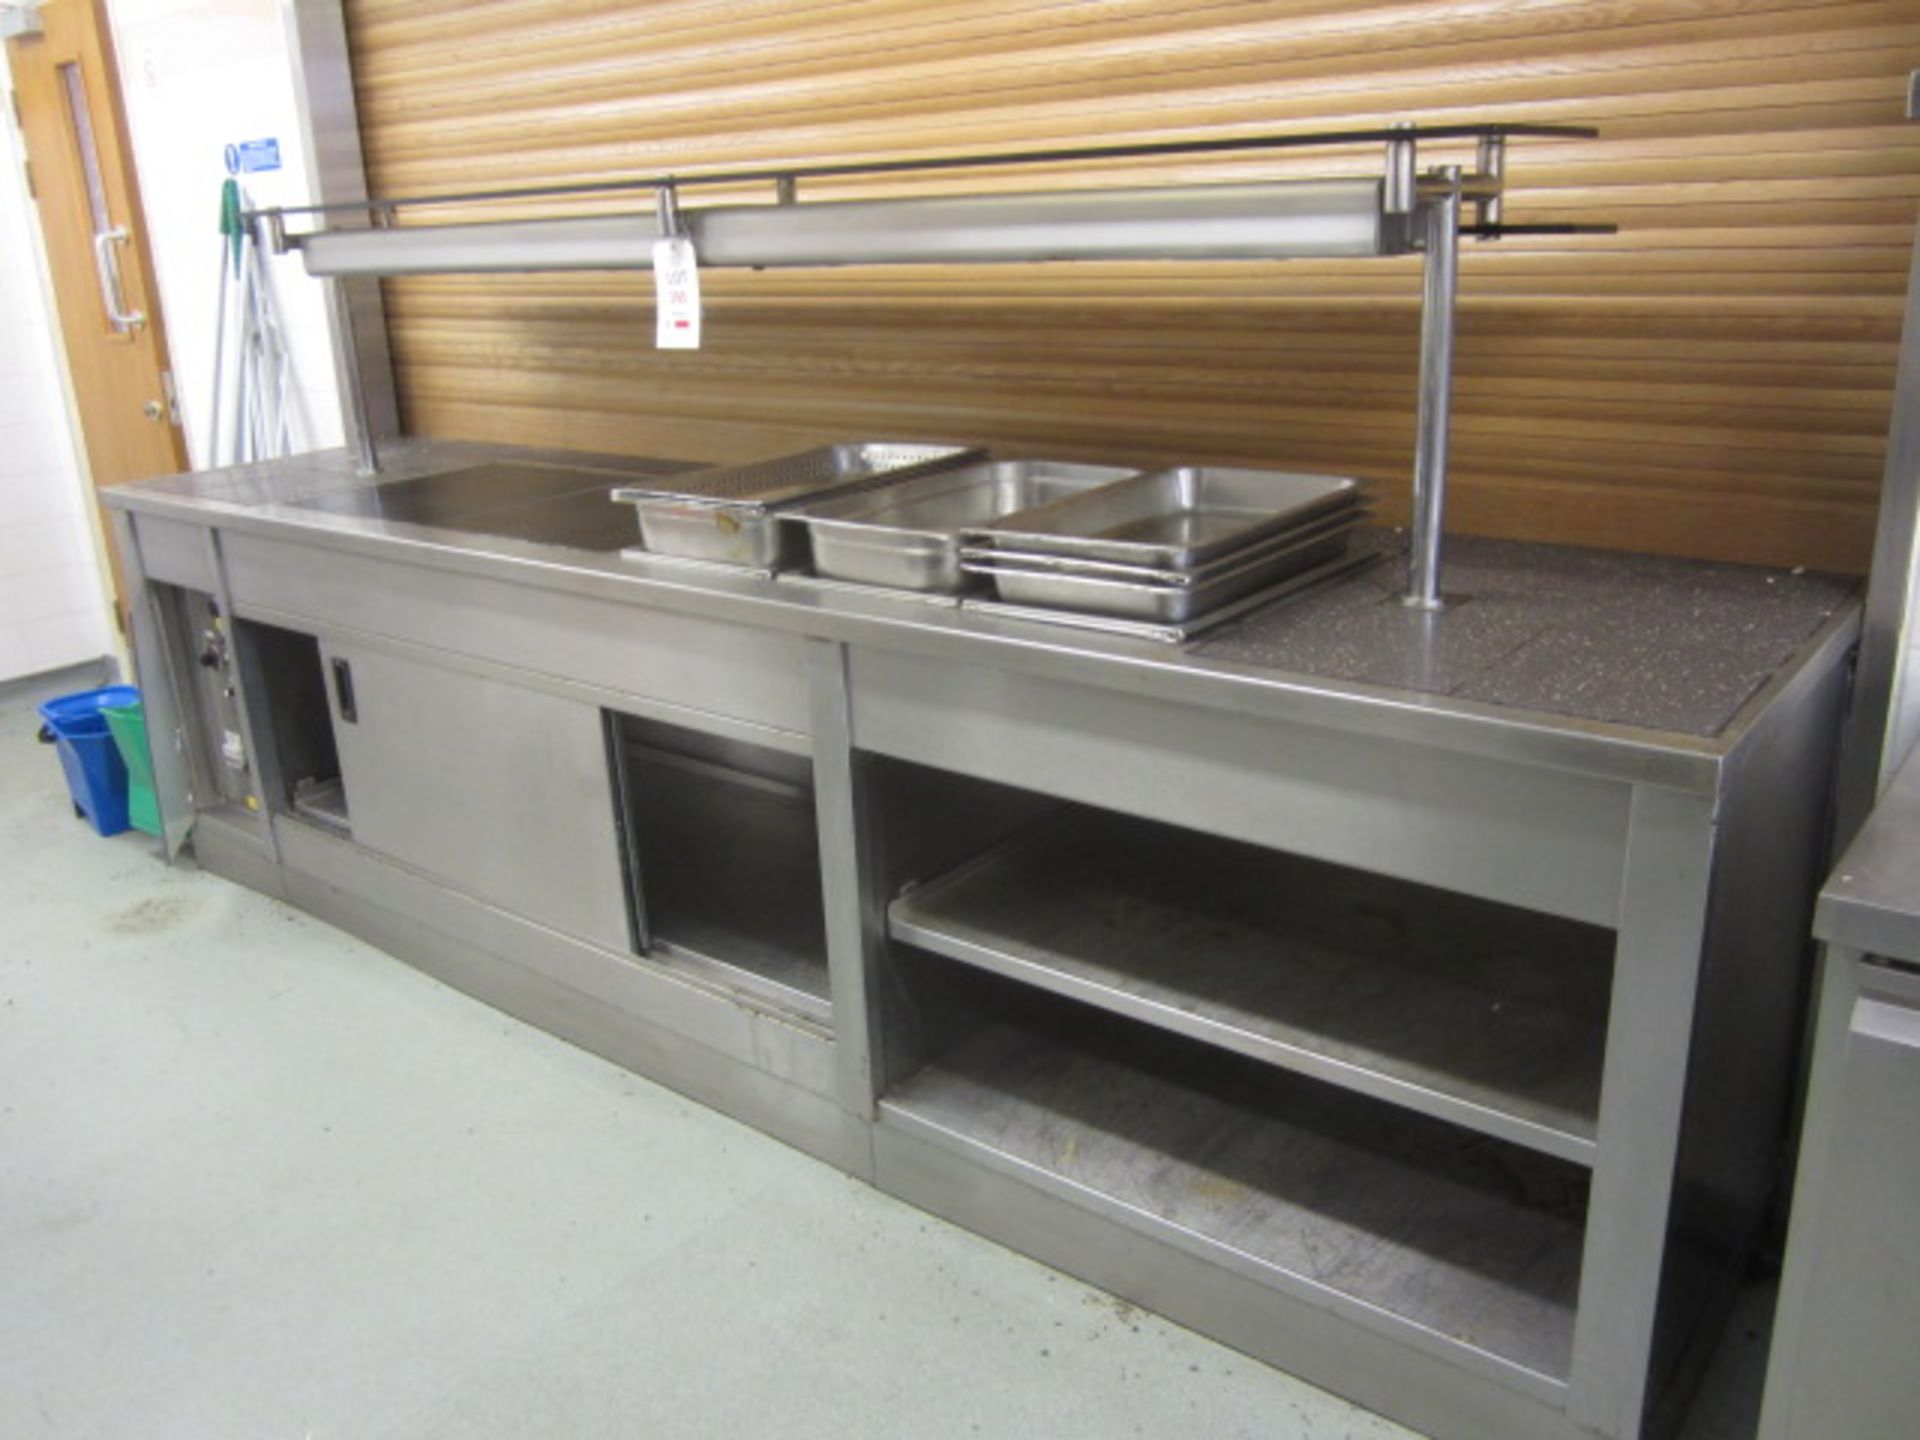 Unbadged stainless steel serving counter comprising 3 section Bain Marie, warming lamps, and hot